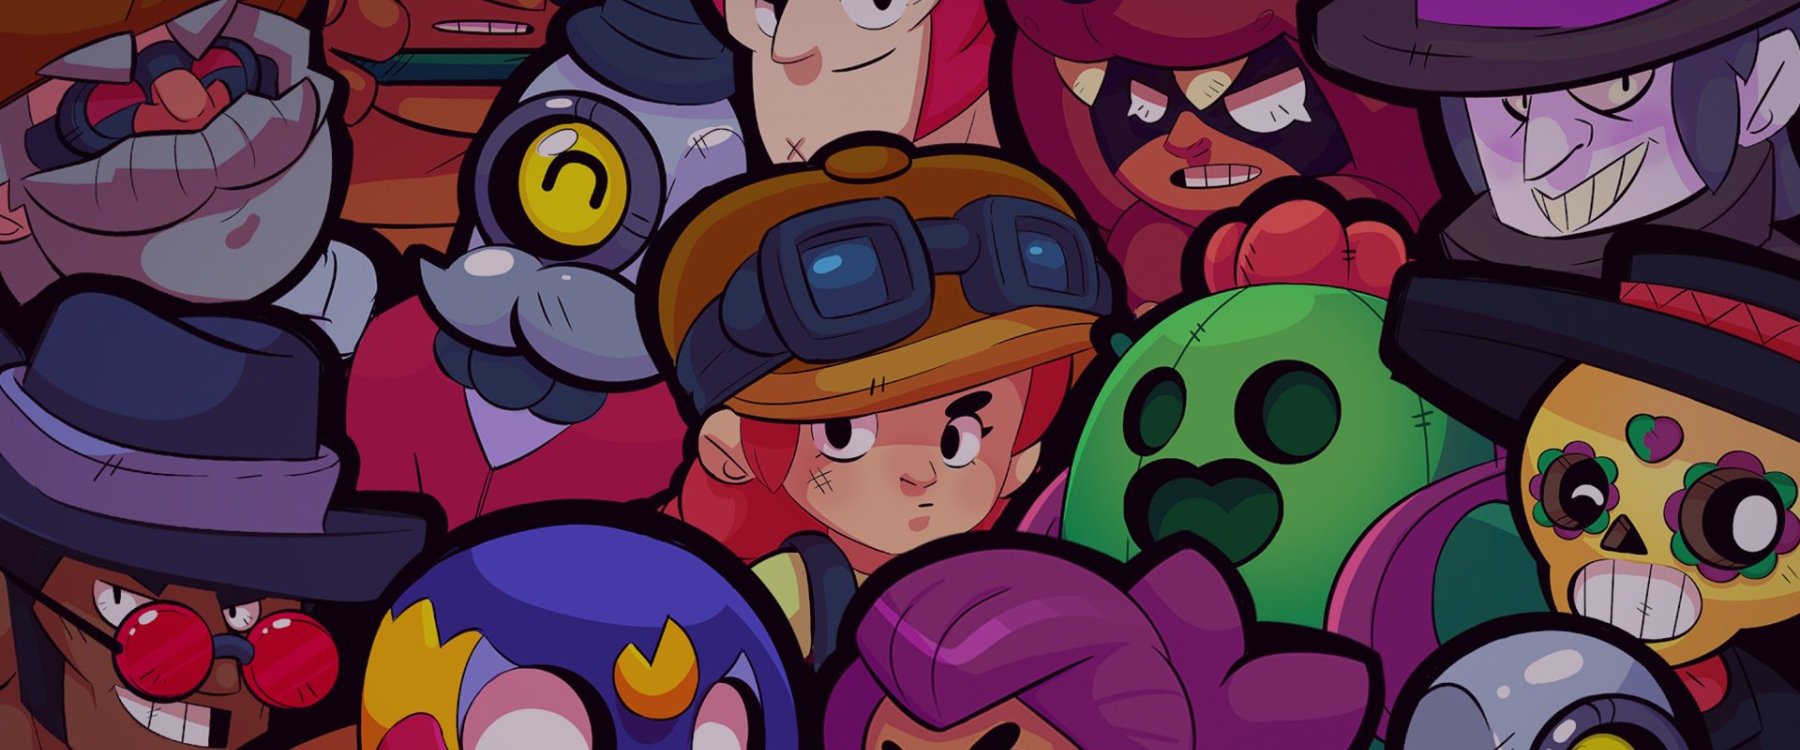 Brawl Stars Best Brawlers: 5 Best Characters to Use